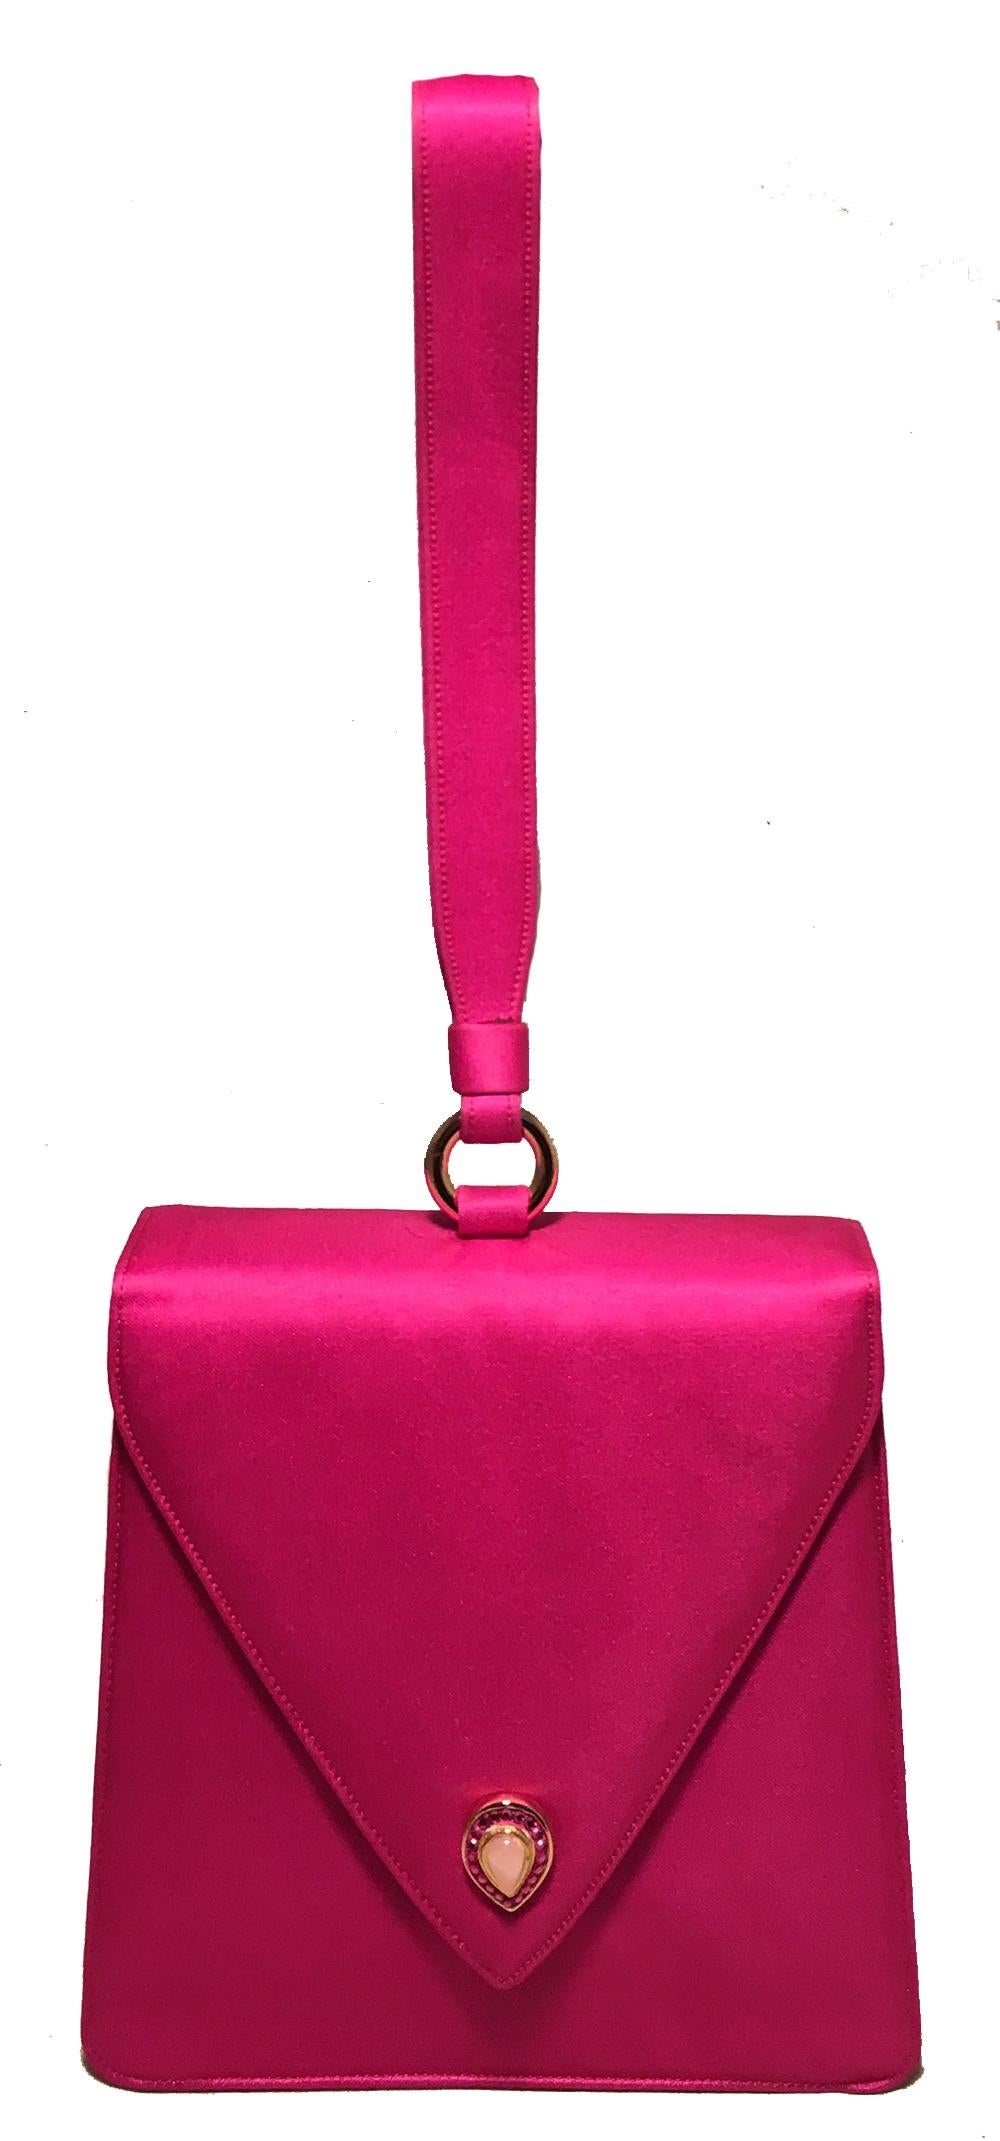 Judith Leiber Vintage Hot Pink Silk Evening Bag Wristlet in good condition. Hot pink silk exterior trimmed with a delicate front gold button with pink stone and crystal embellishments. Top flap snap closure opens to a pink silk interior that holds